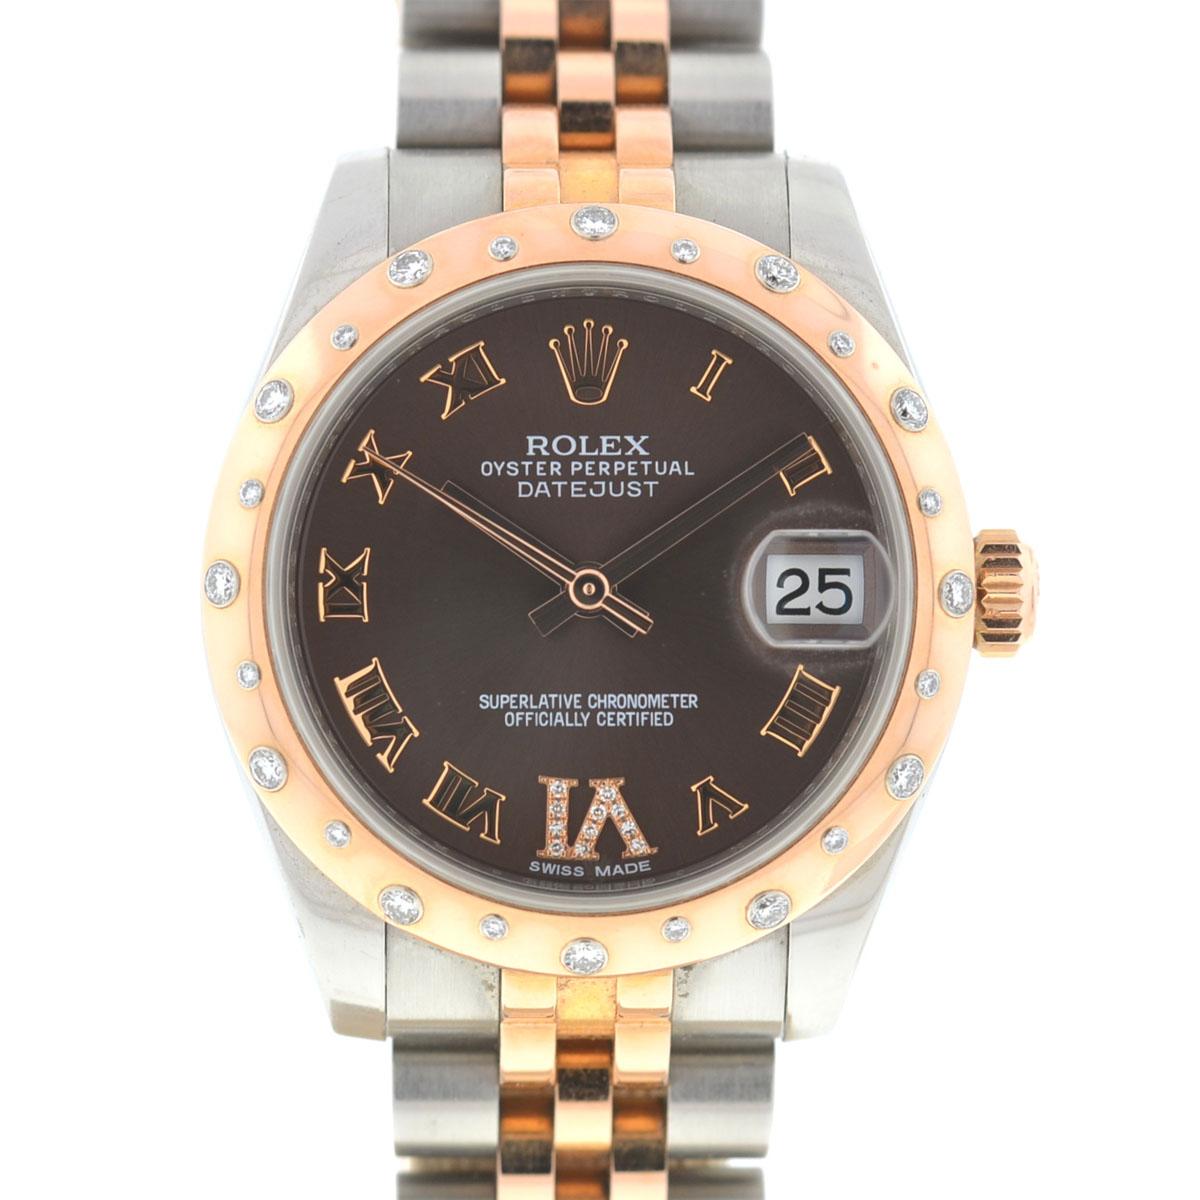 Company - Rolex
Style - Dress/Formal
Model - Datejust 31 
Reference Number - 178341
Case Metal - Stainless Steel
Case Measurement - 31 mm 
Bracelet - 18k Rose Gold & Stainless Steel - Fits a 5 1/2 size wrist
Dial - Chocolate
Bezel - 18k Rose Gold w/